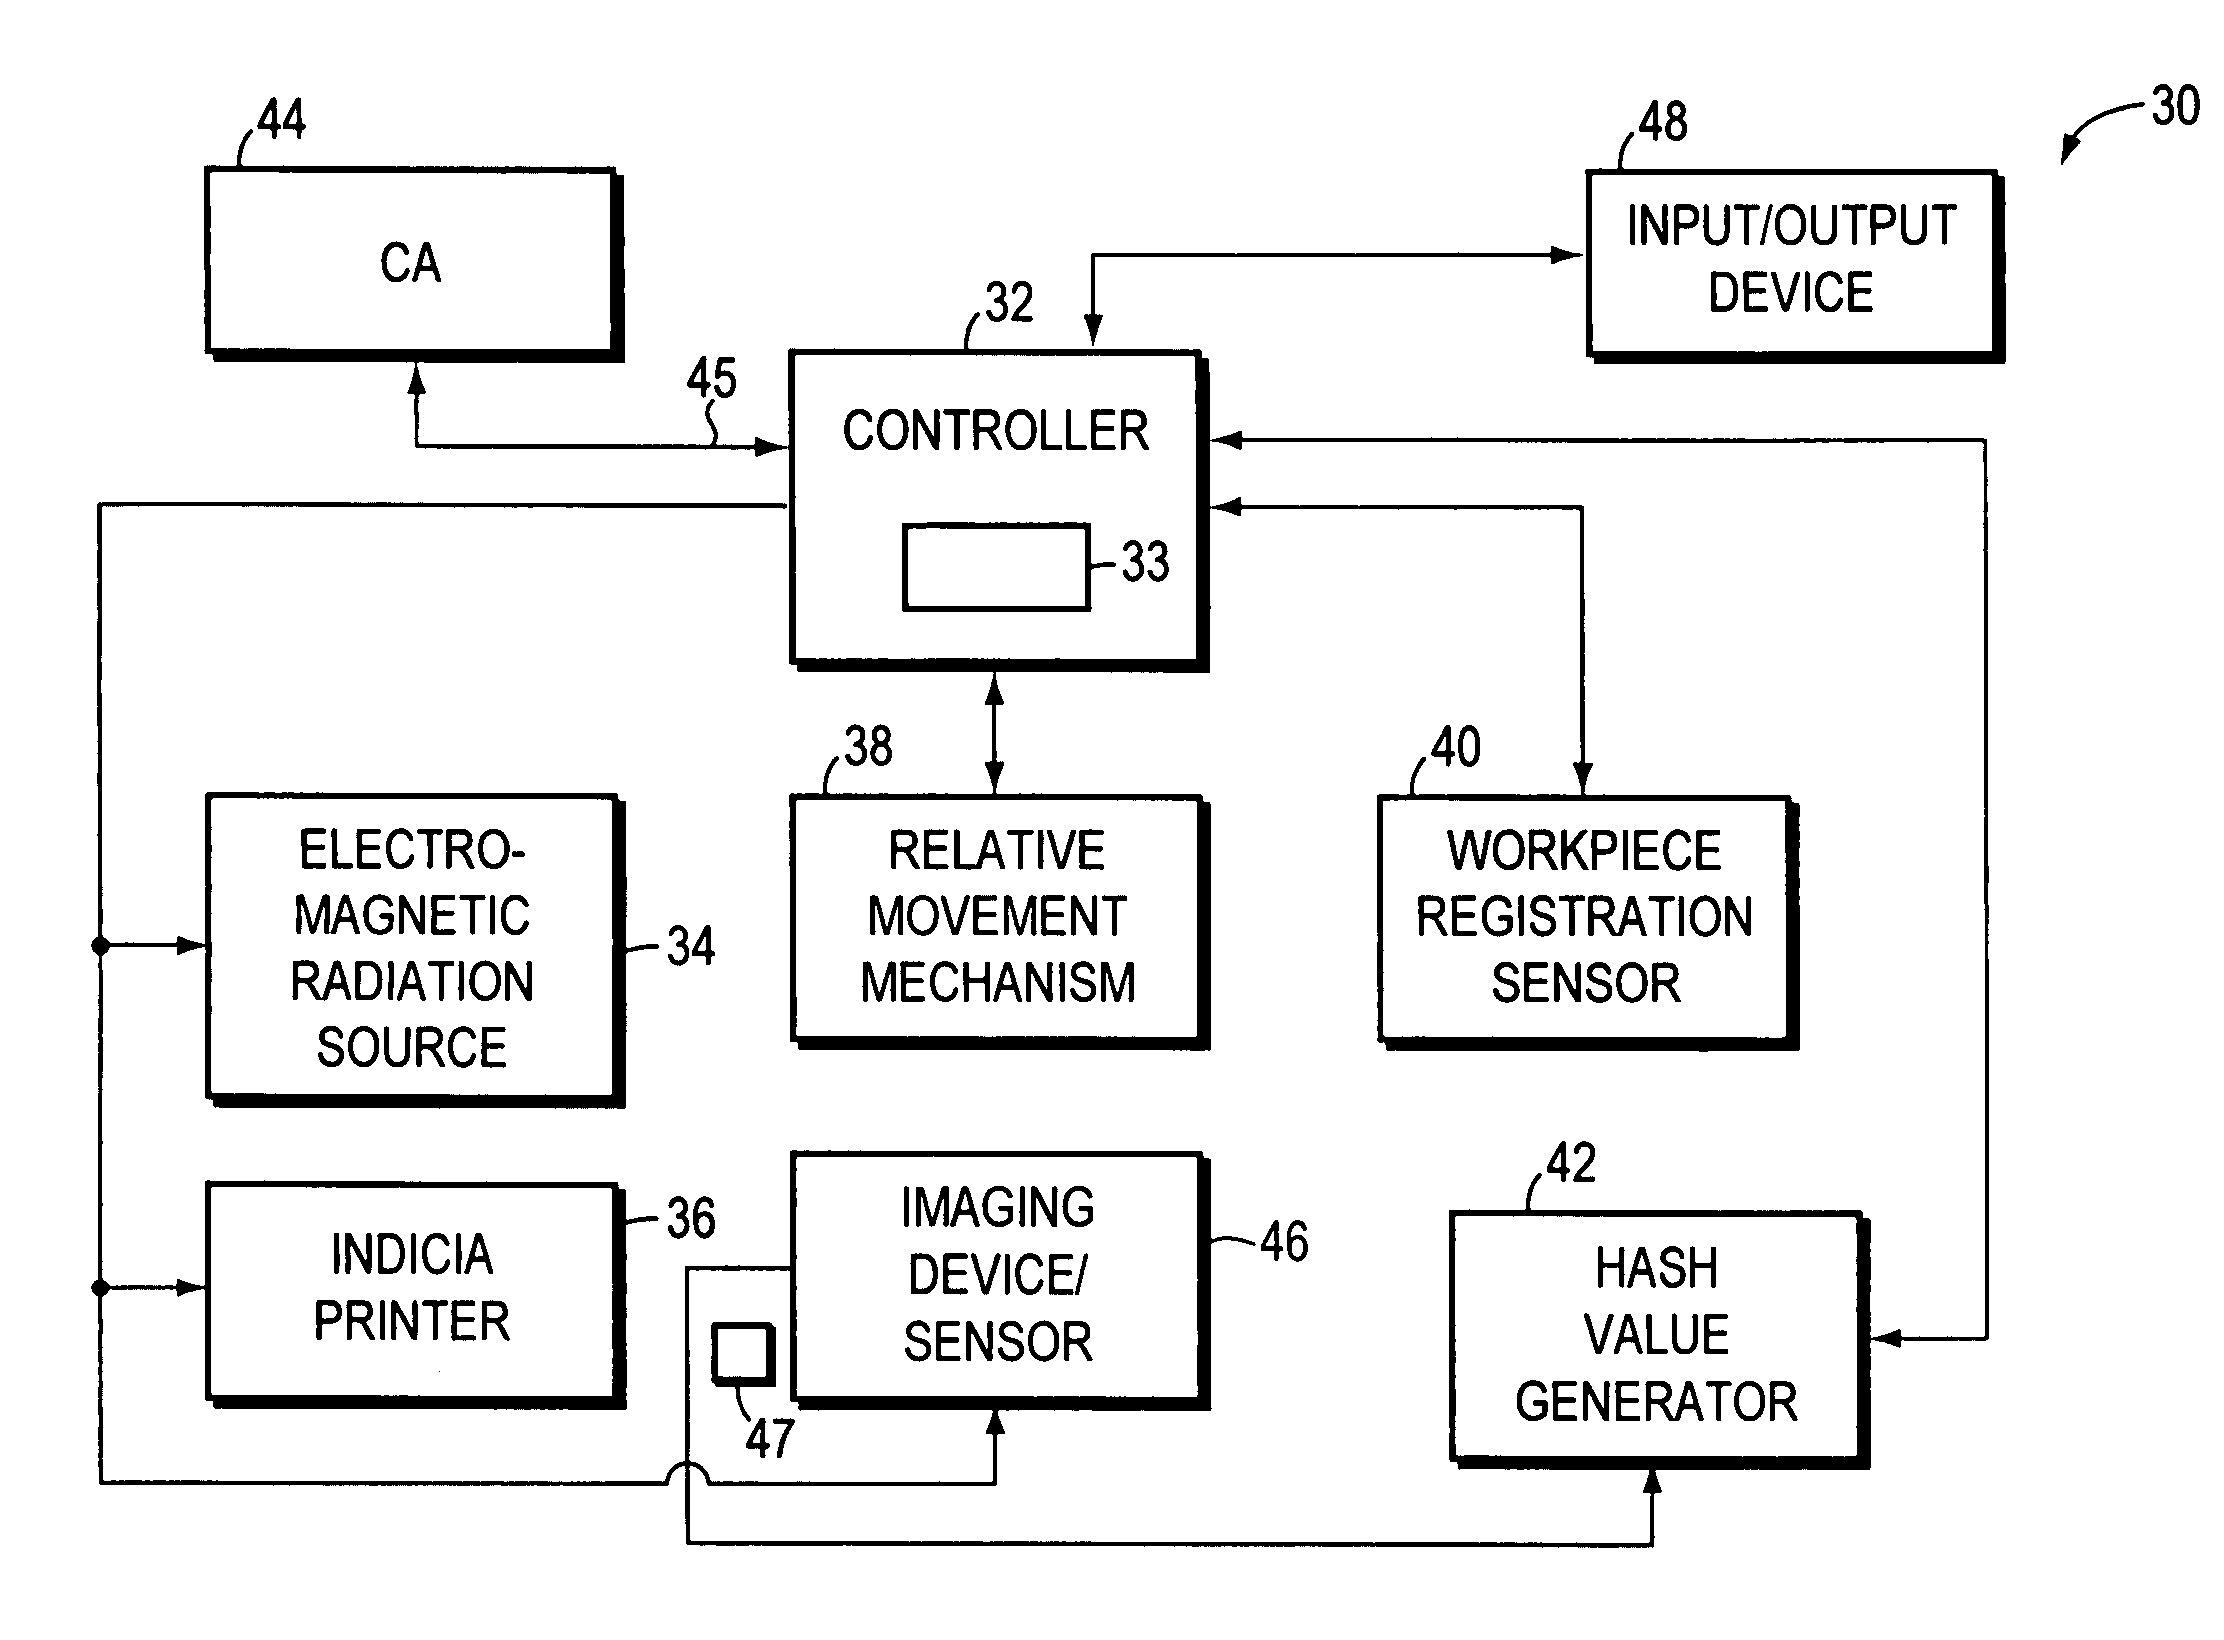 Workpiece authentication based upon one or more workpiece images